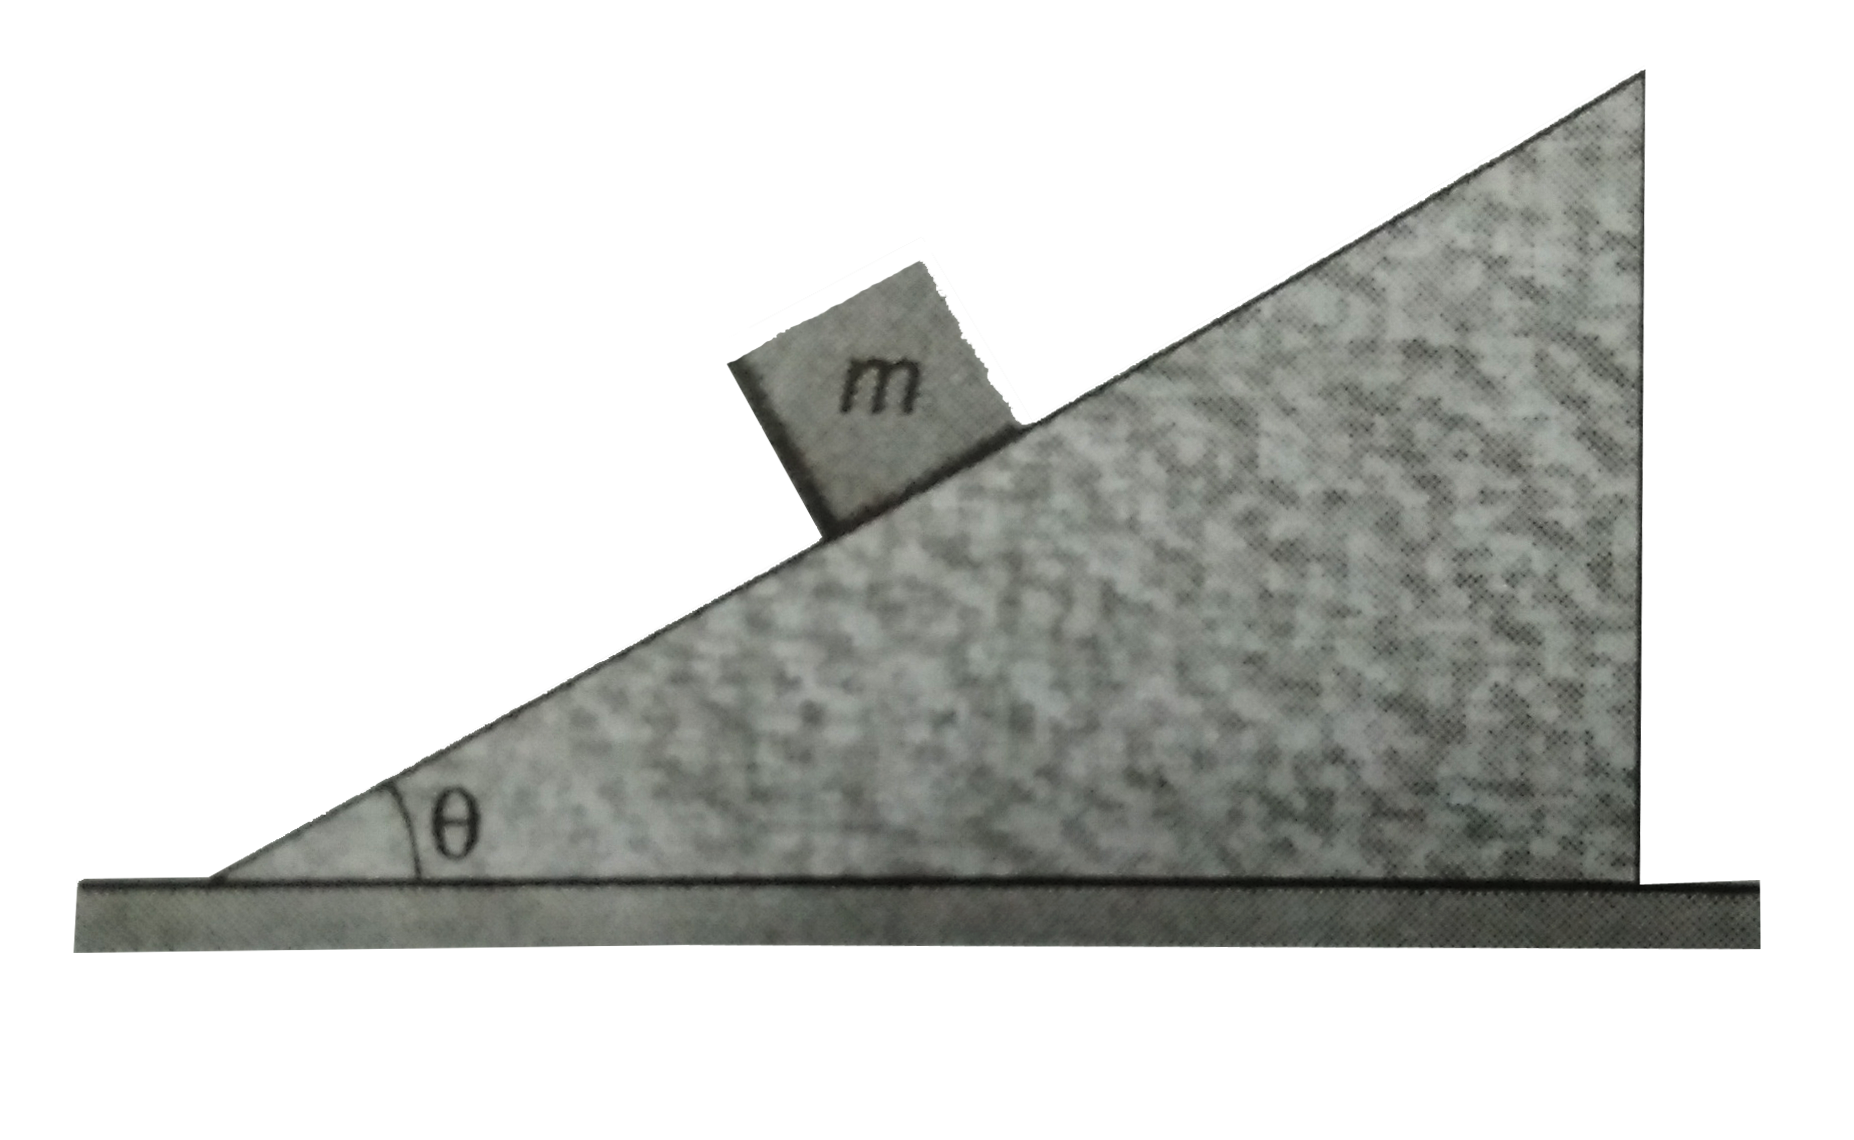 A block of mass m is at rest on a rought wedge as shown in figure. What is the force exerted by the wedge on the block?